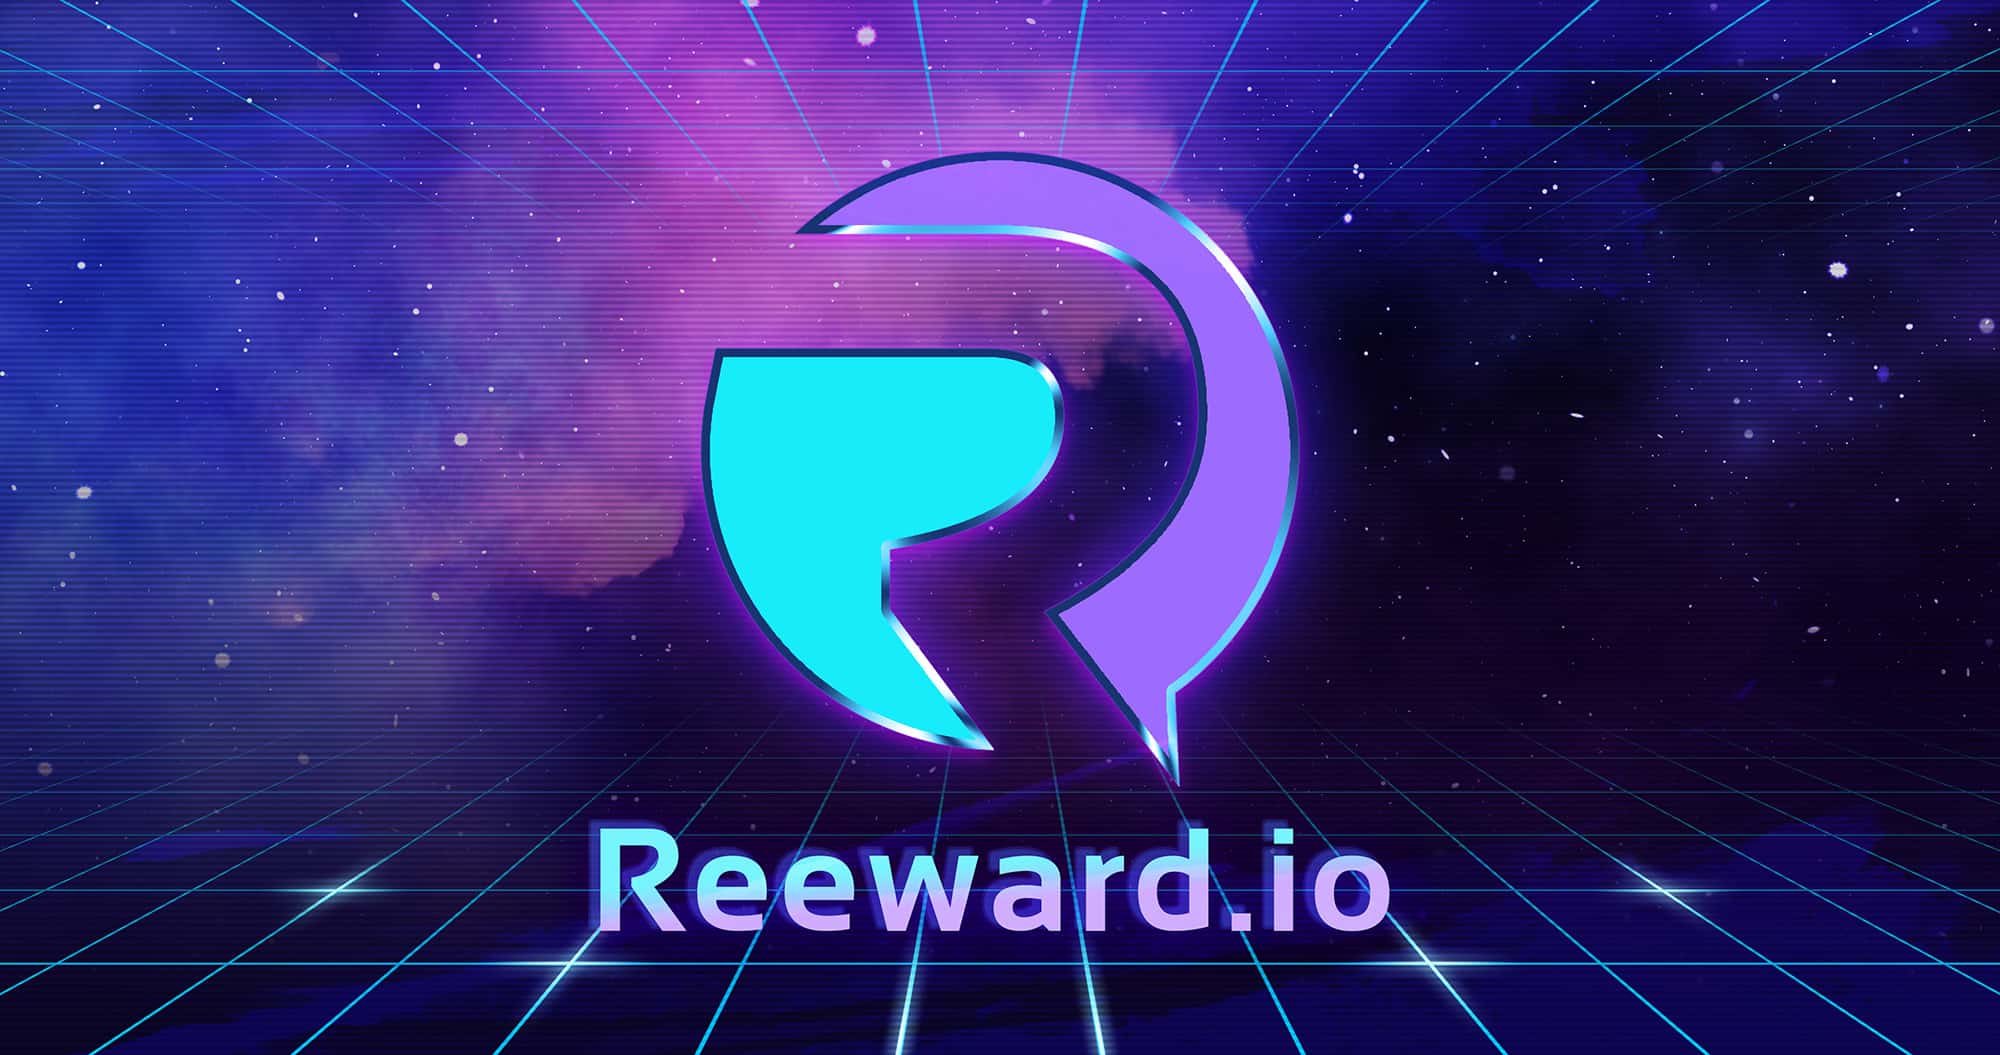 Announcing Reewardio Bounty Launch With A Massive Giveaway